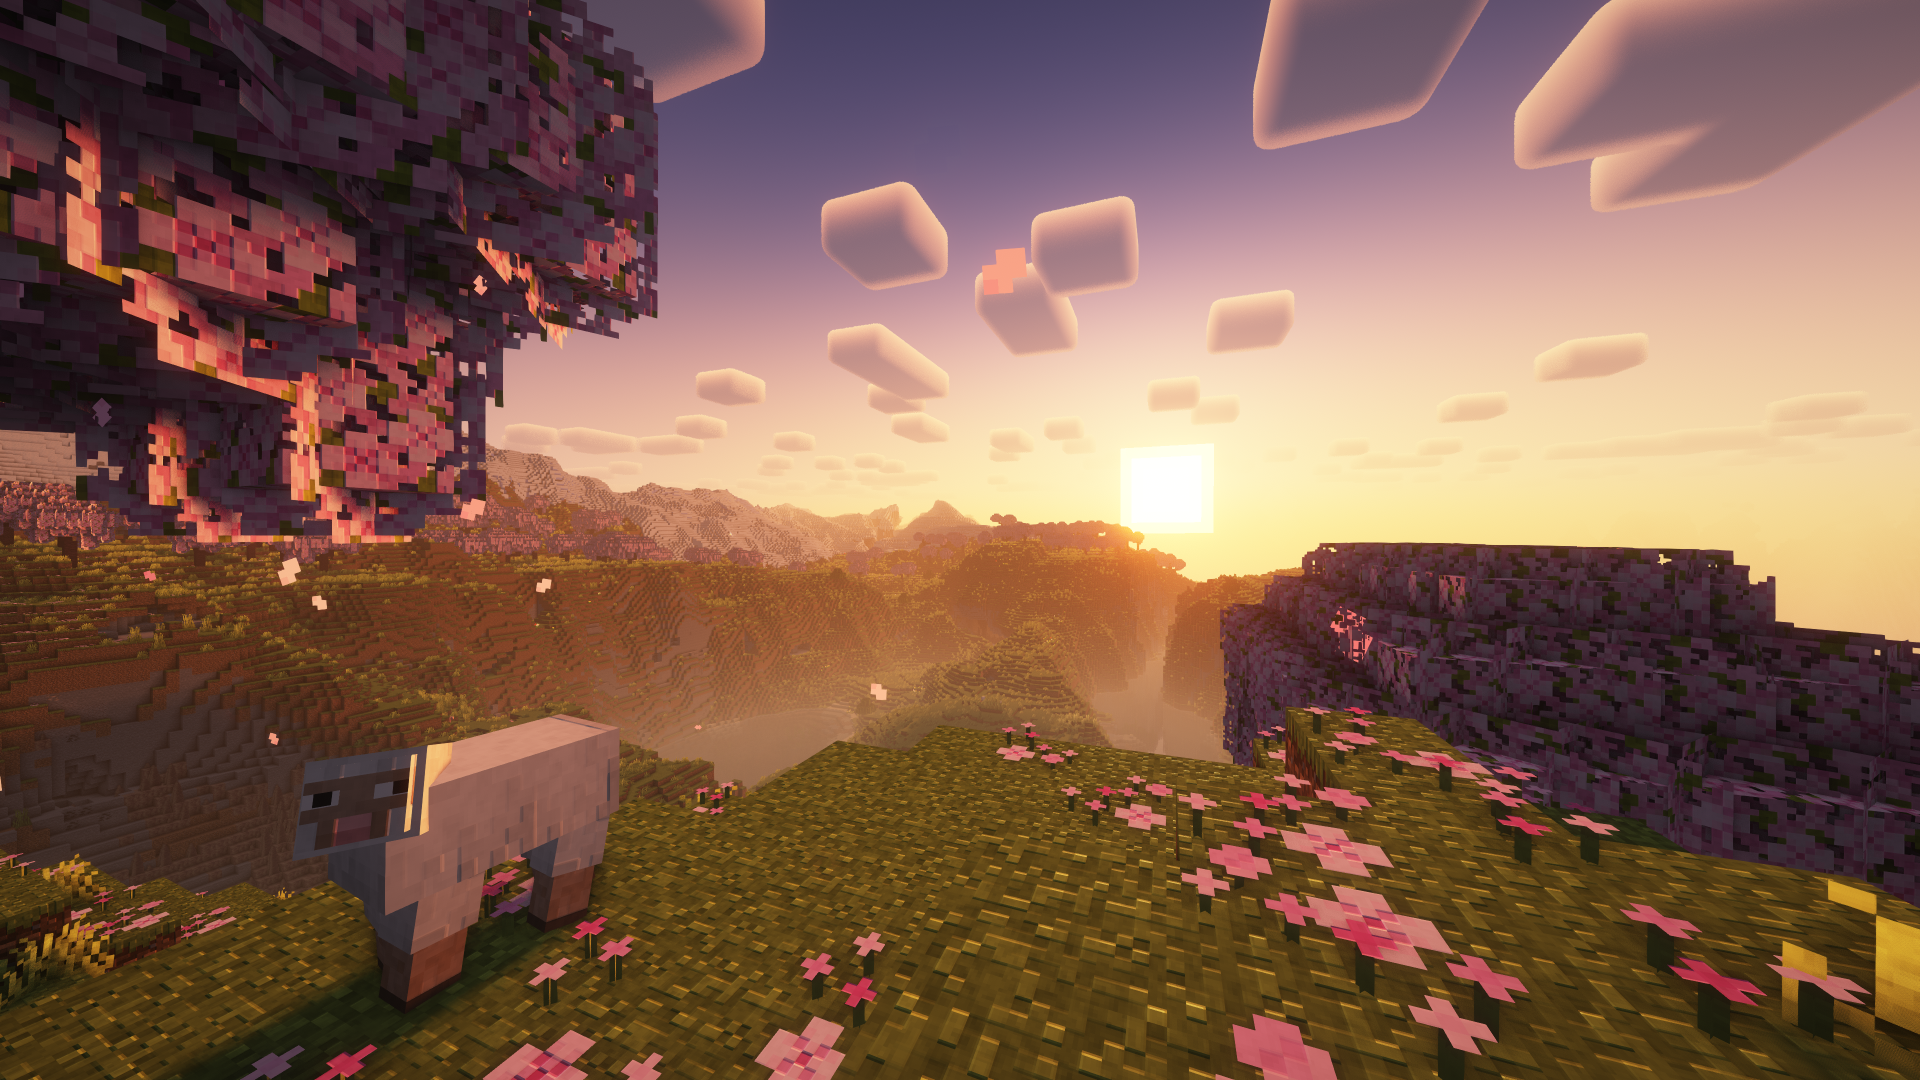 This is another example of shaders in Tachyon. 
The shader you see here is Voxels Reimagined on the highest settings